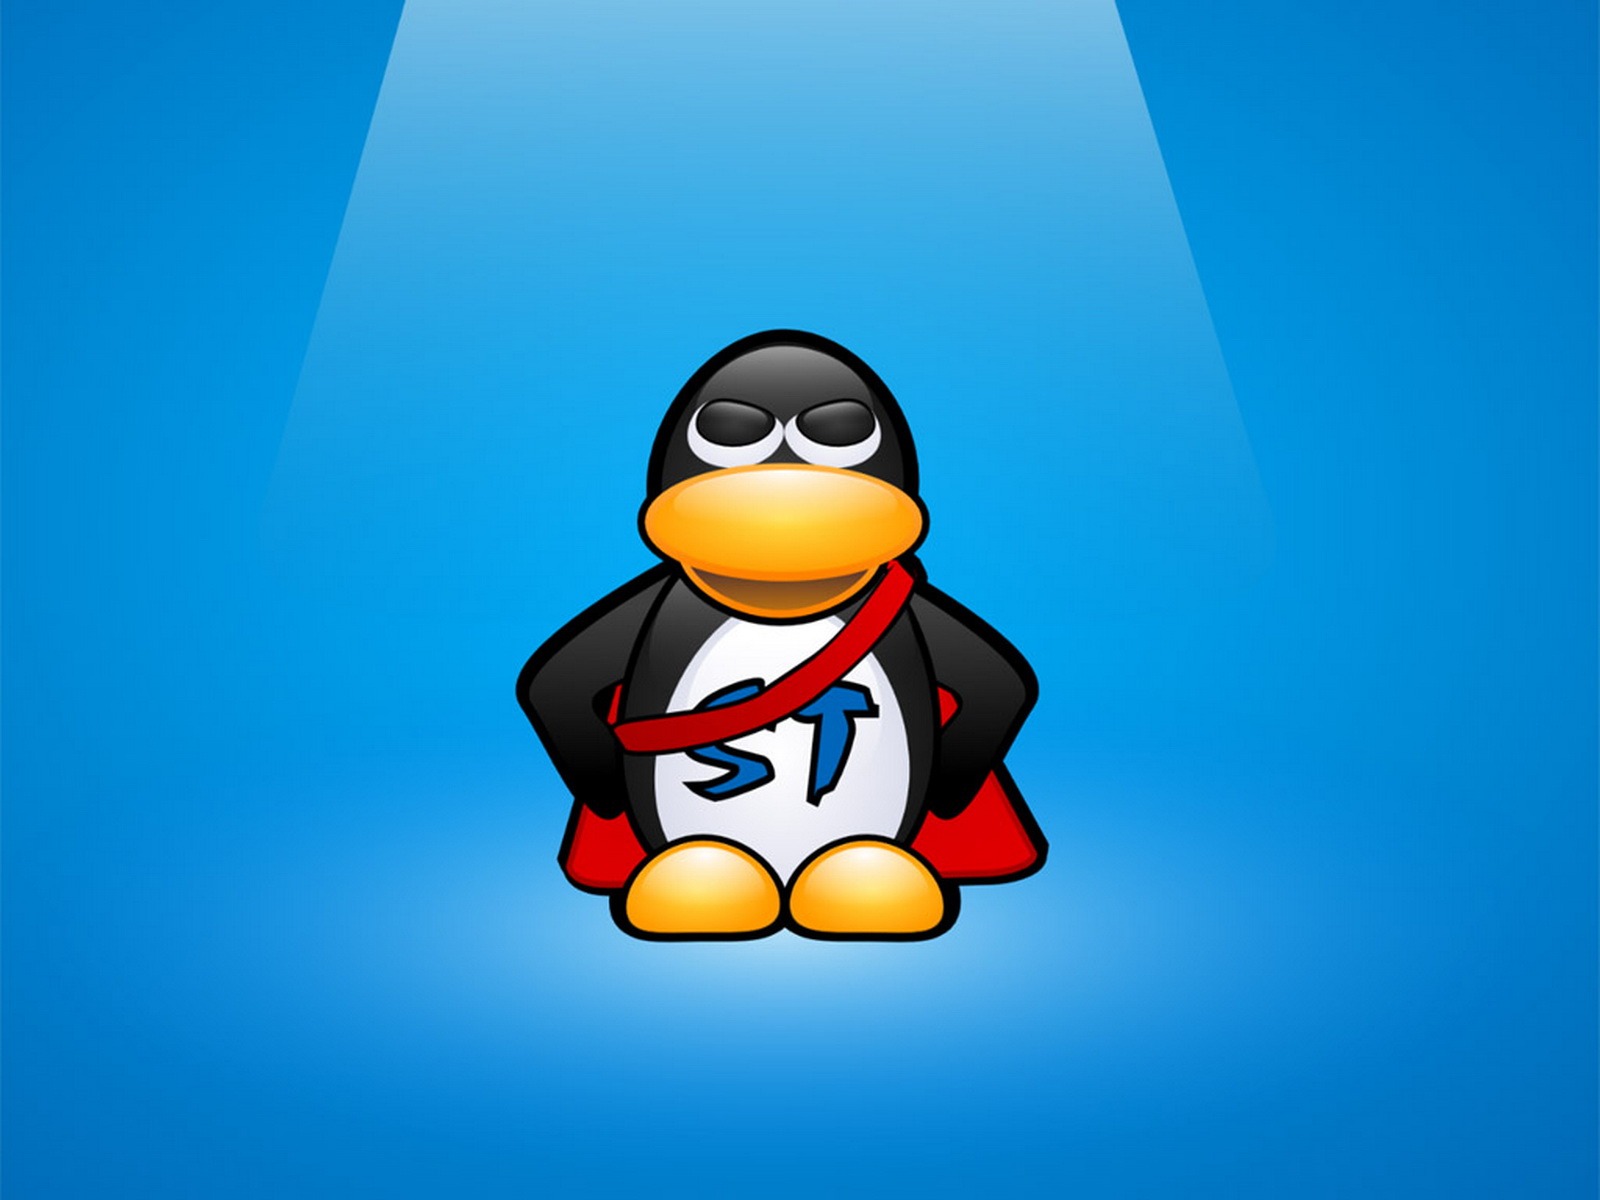 Linux tapety (3) #1 - 1600x1200